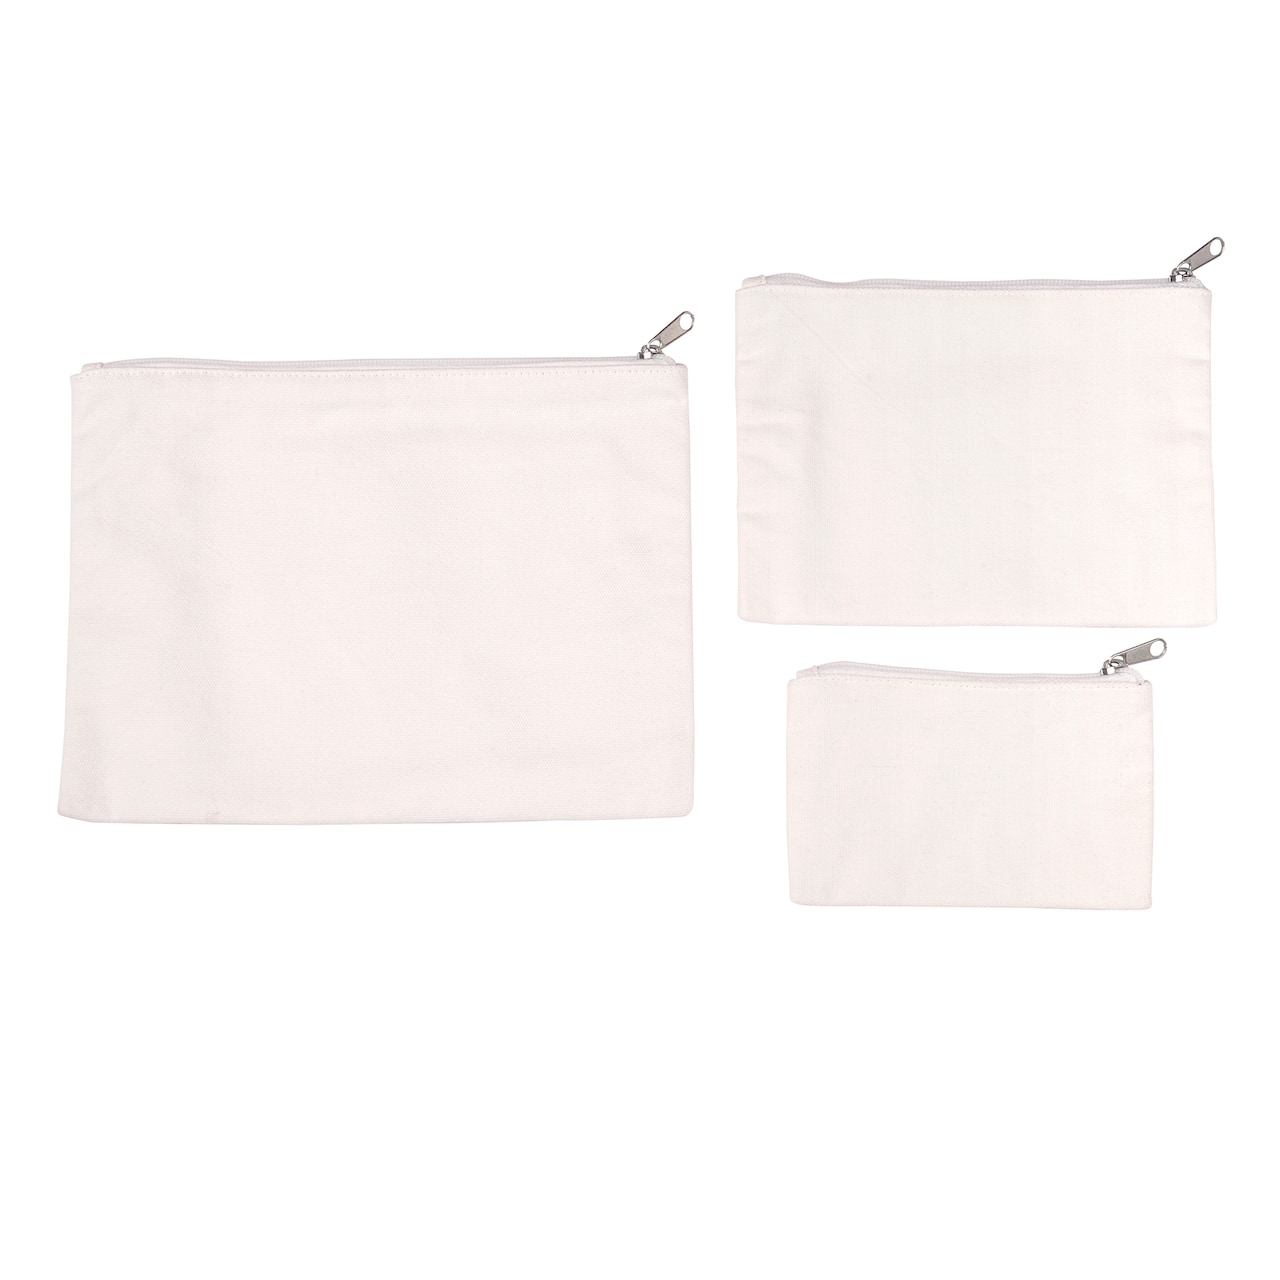 12 Packs: 3 ct. (36 total) White Canvas Pouches by Make Market&#xAE;